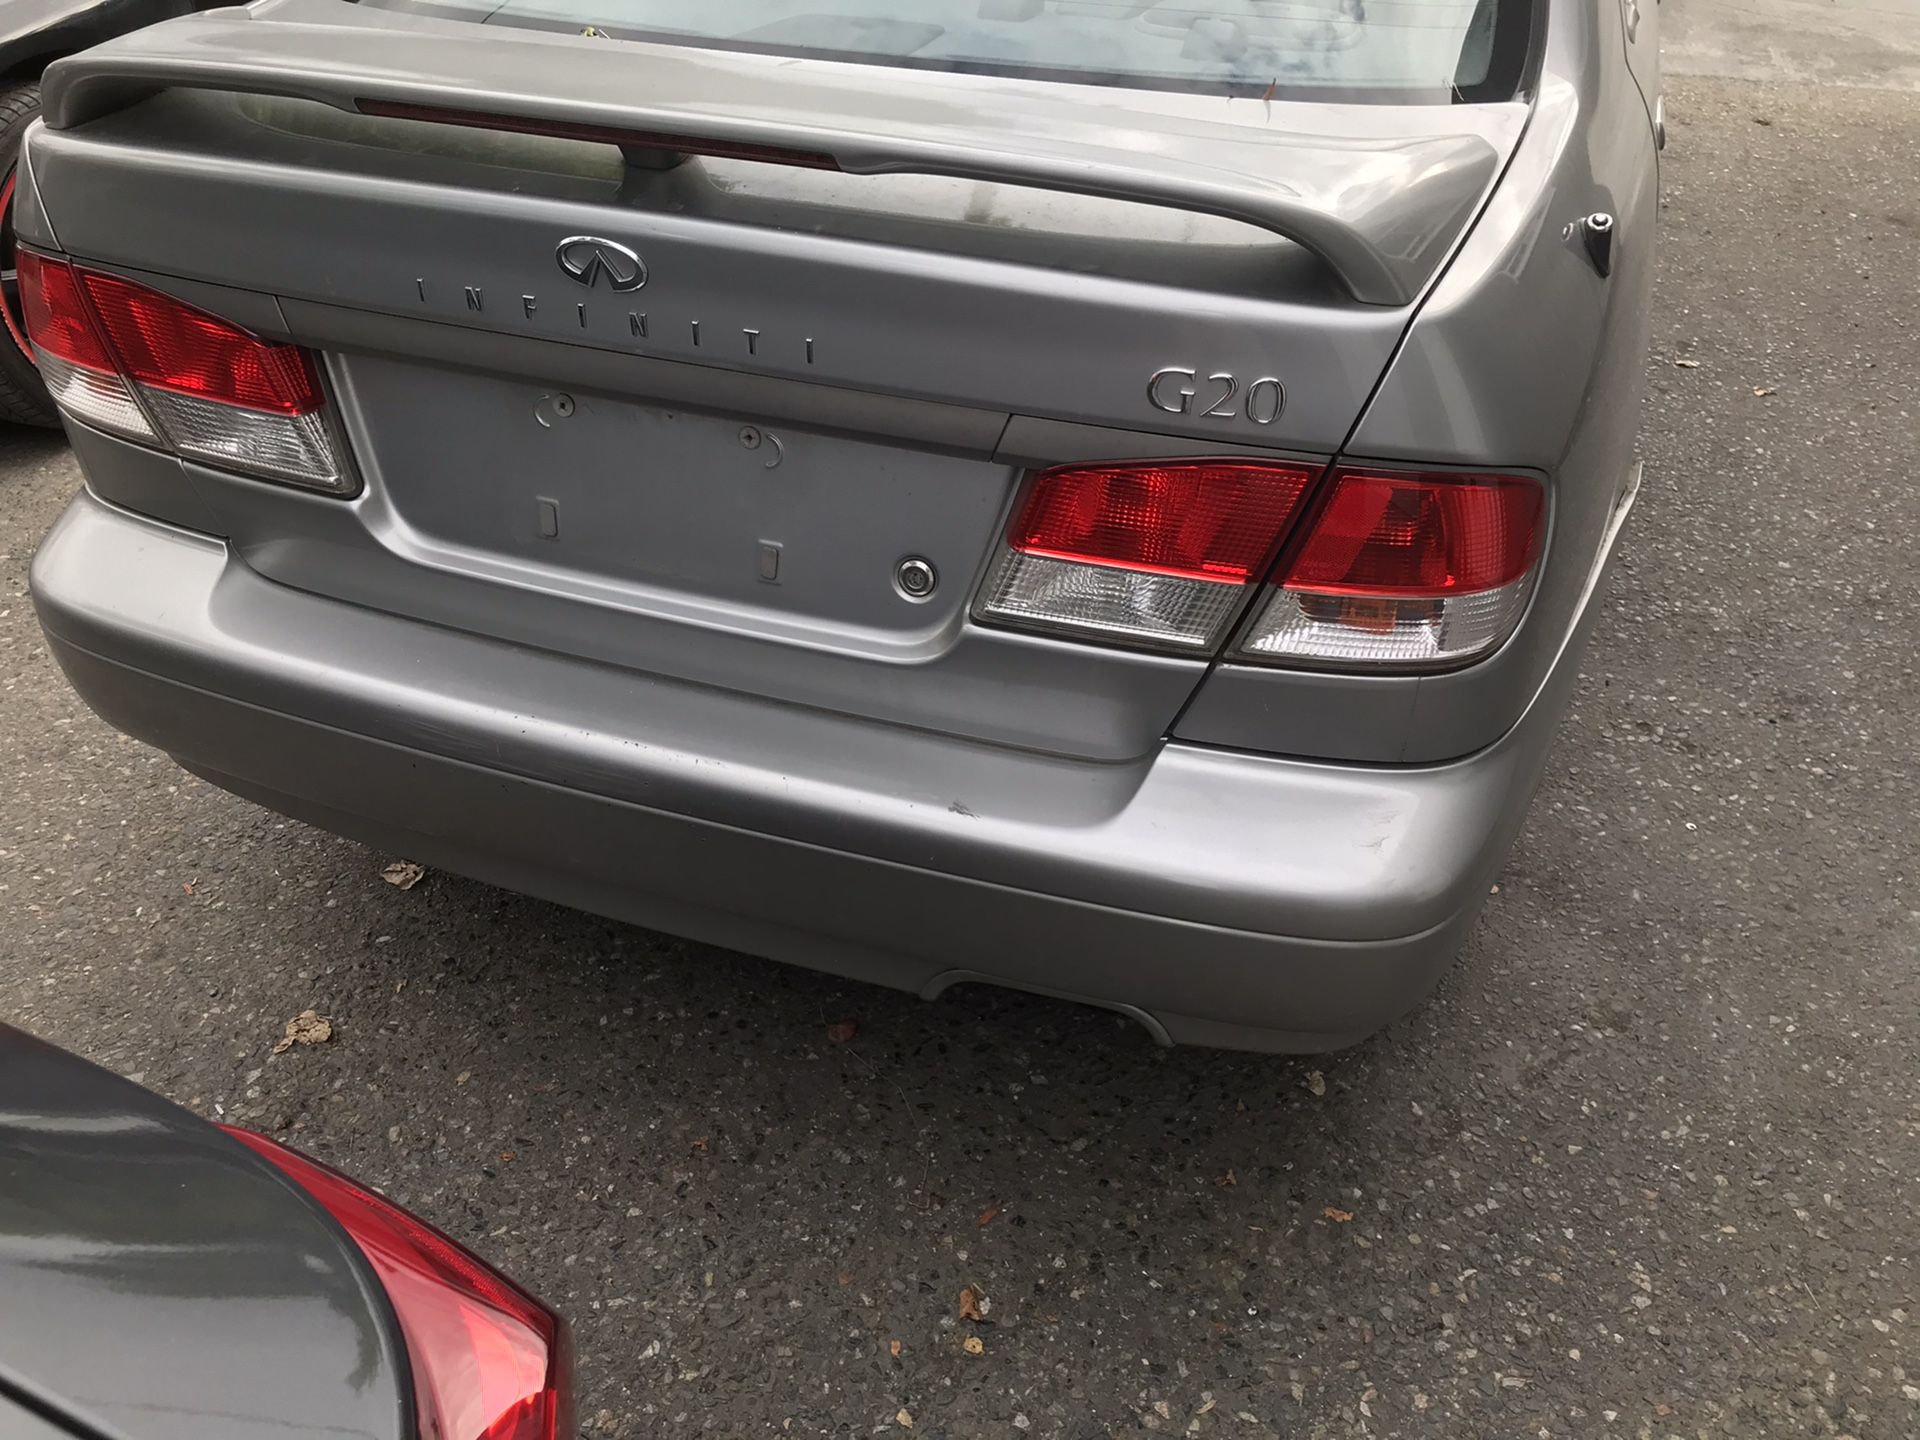 2000 infinity g20 for parts